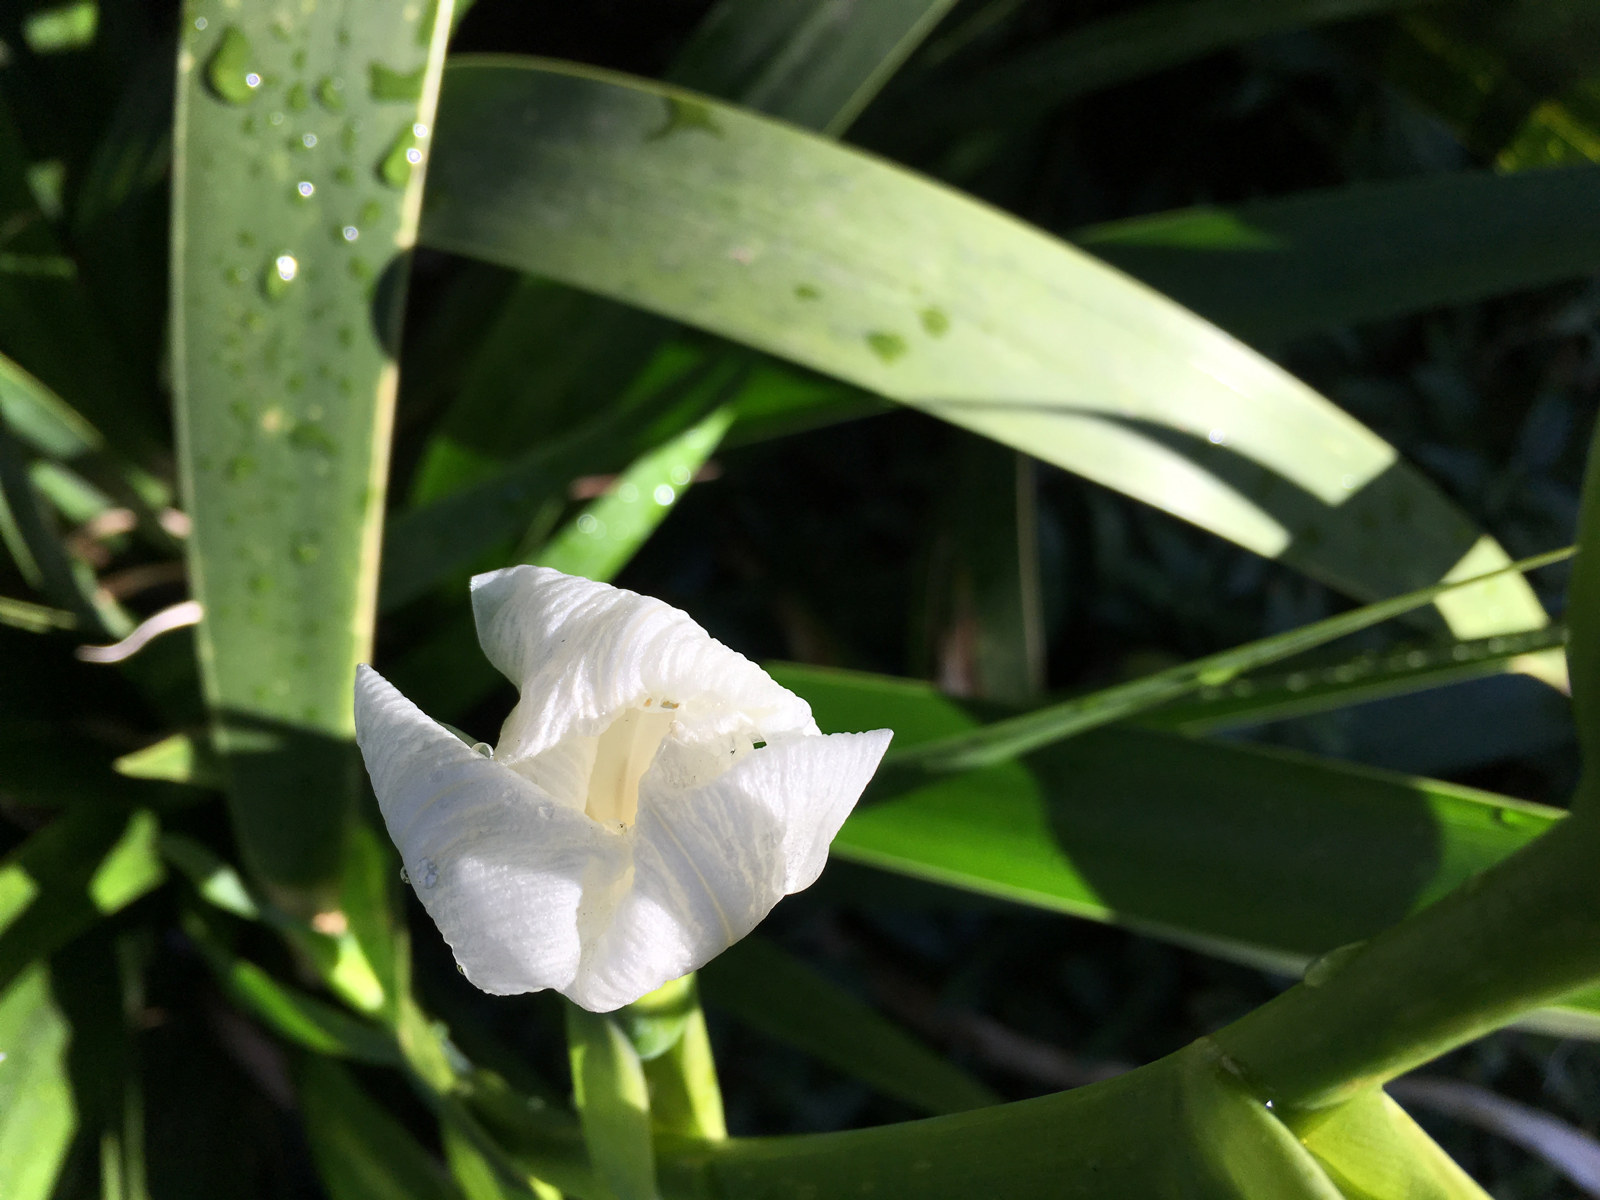 the flower of dietes robinsoniana opening in the morning sunshine